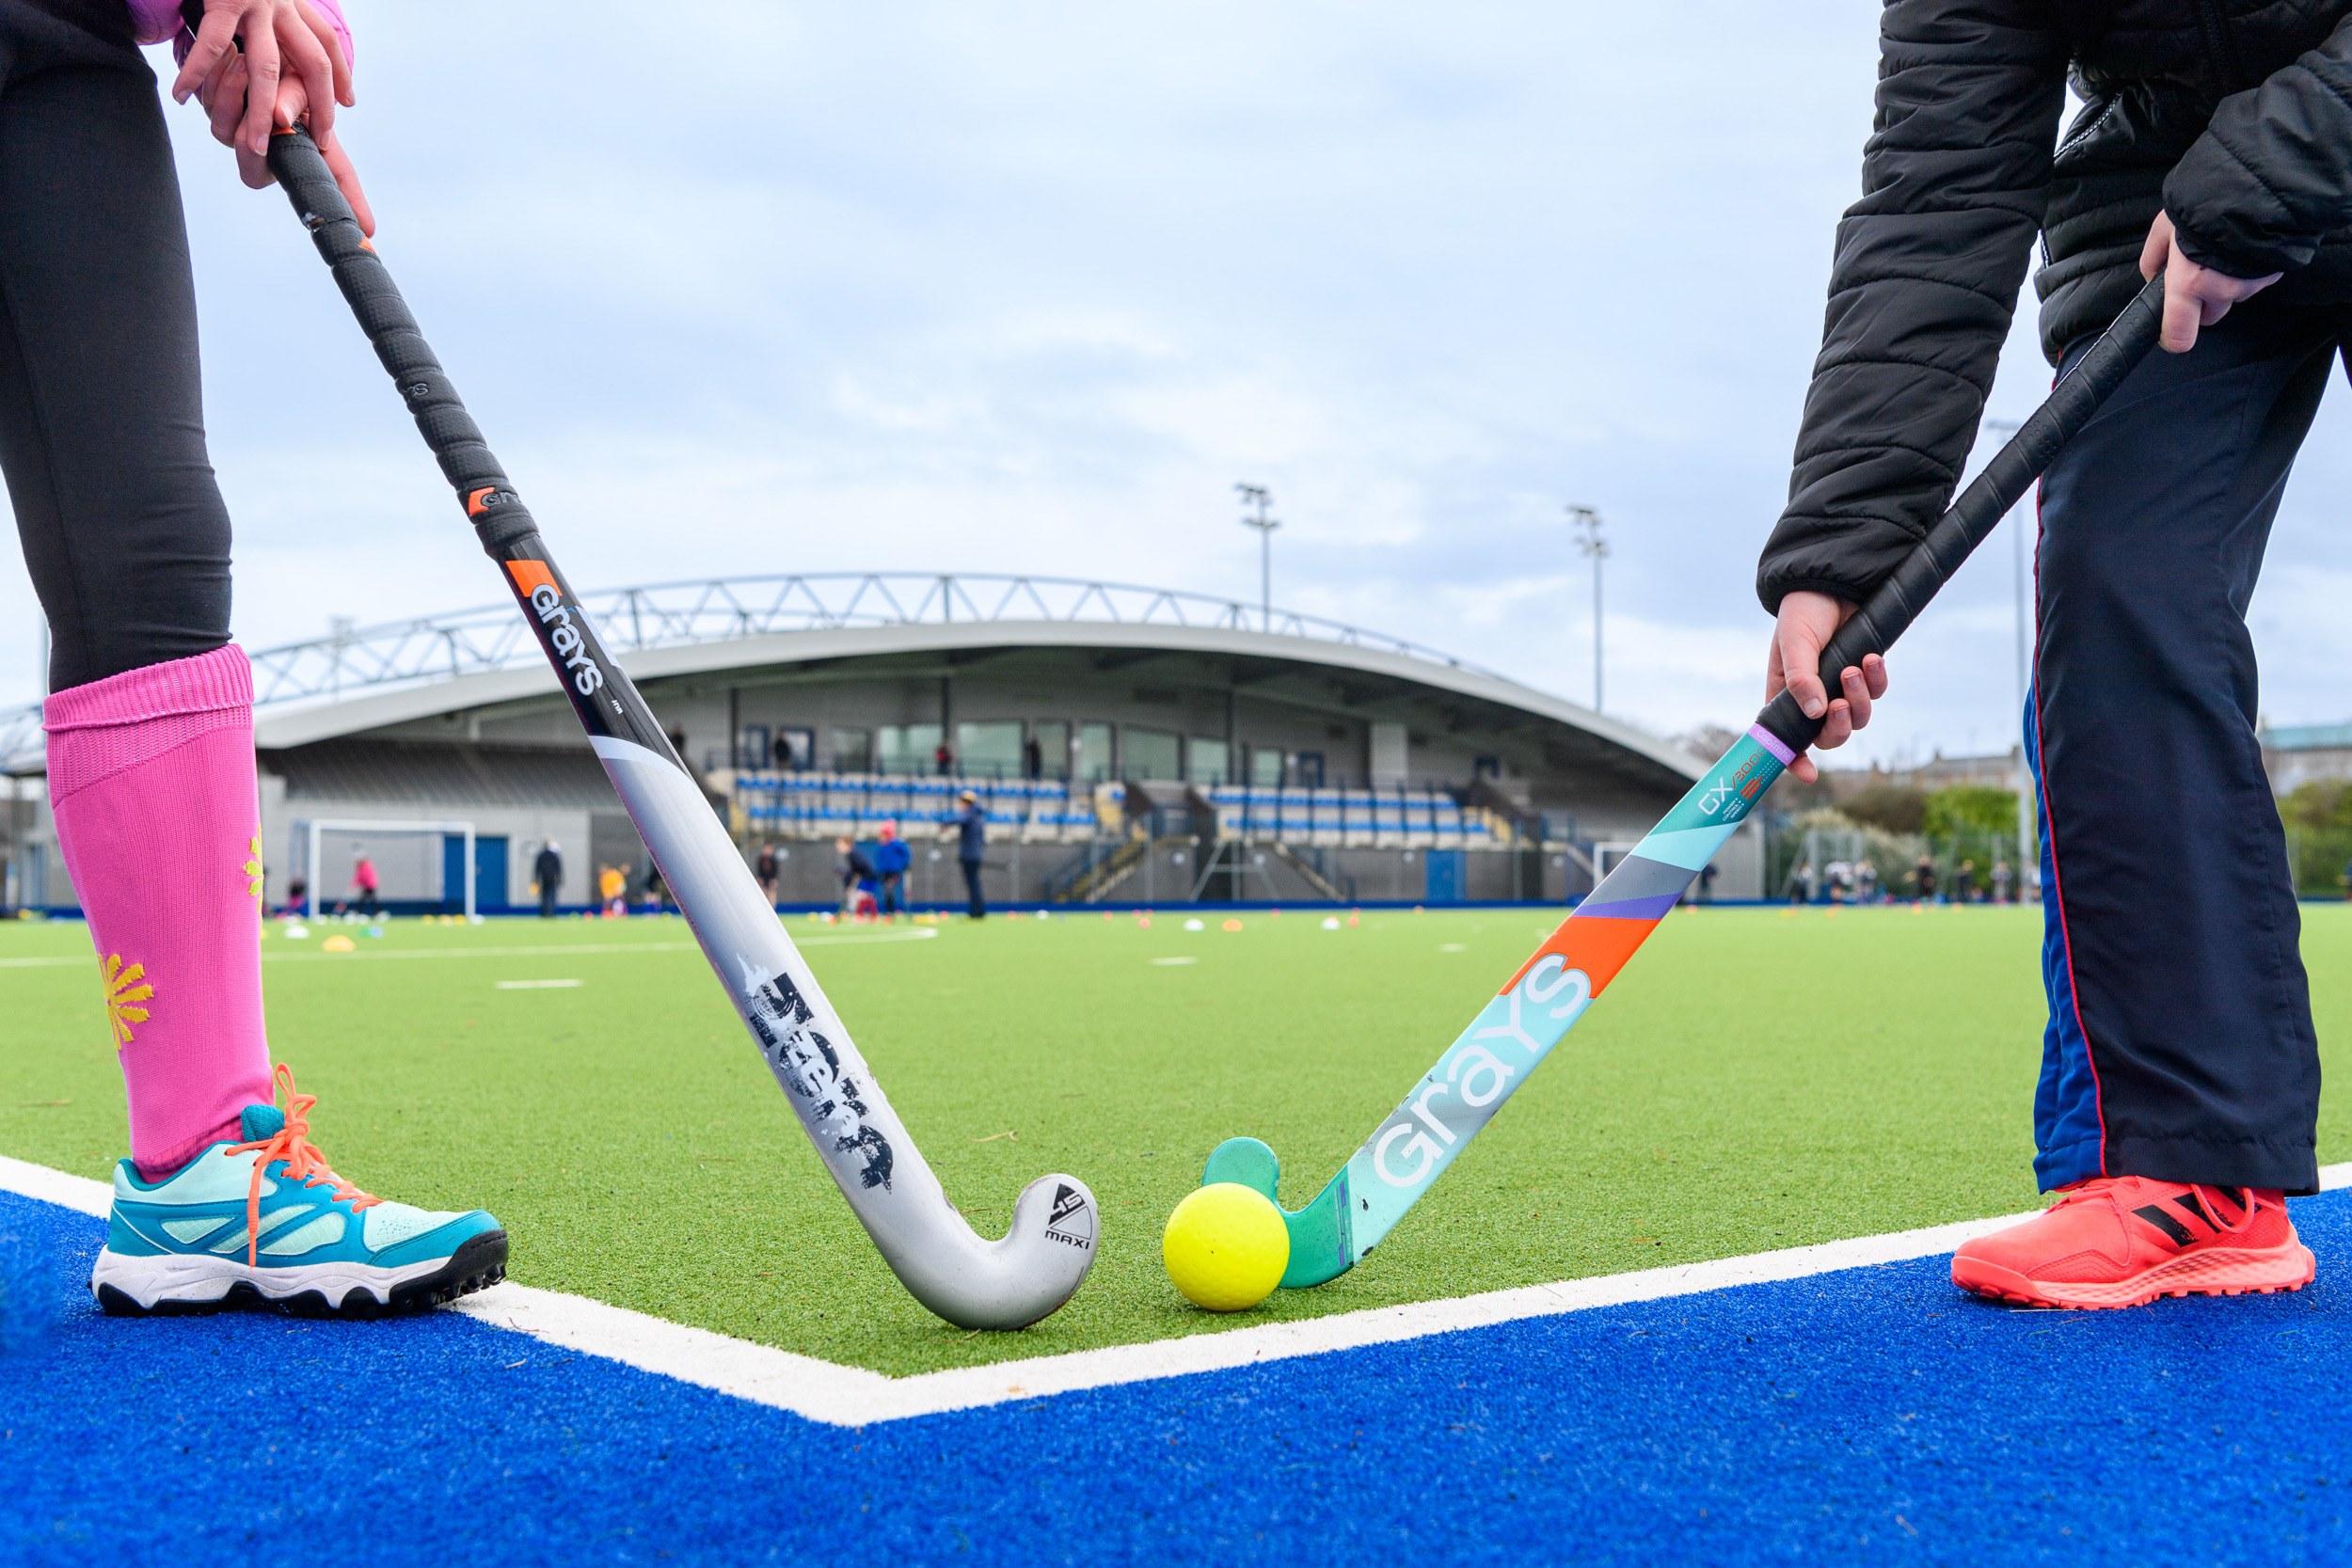 'Cala Hockey' ladies team returns to top division after five years